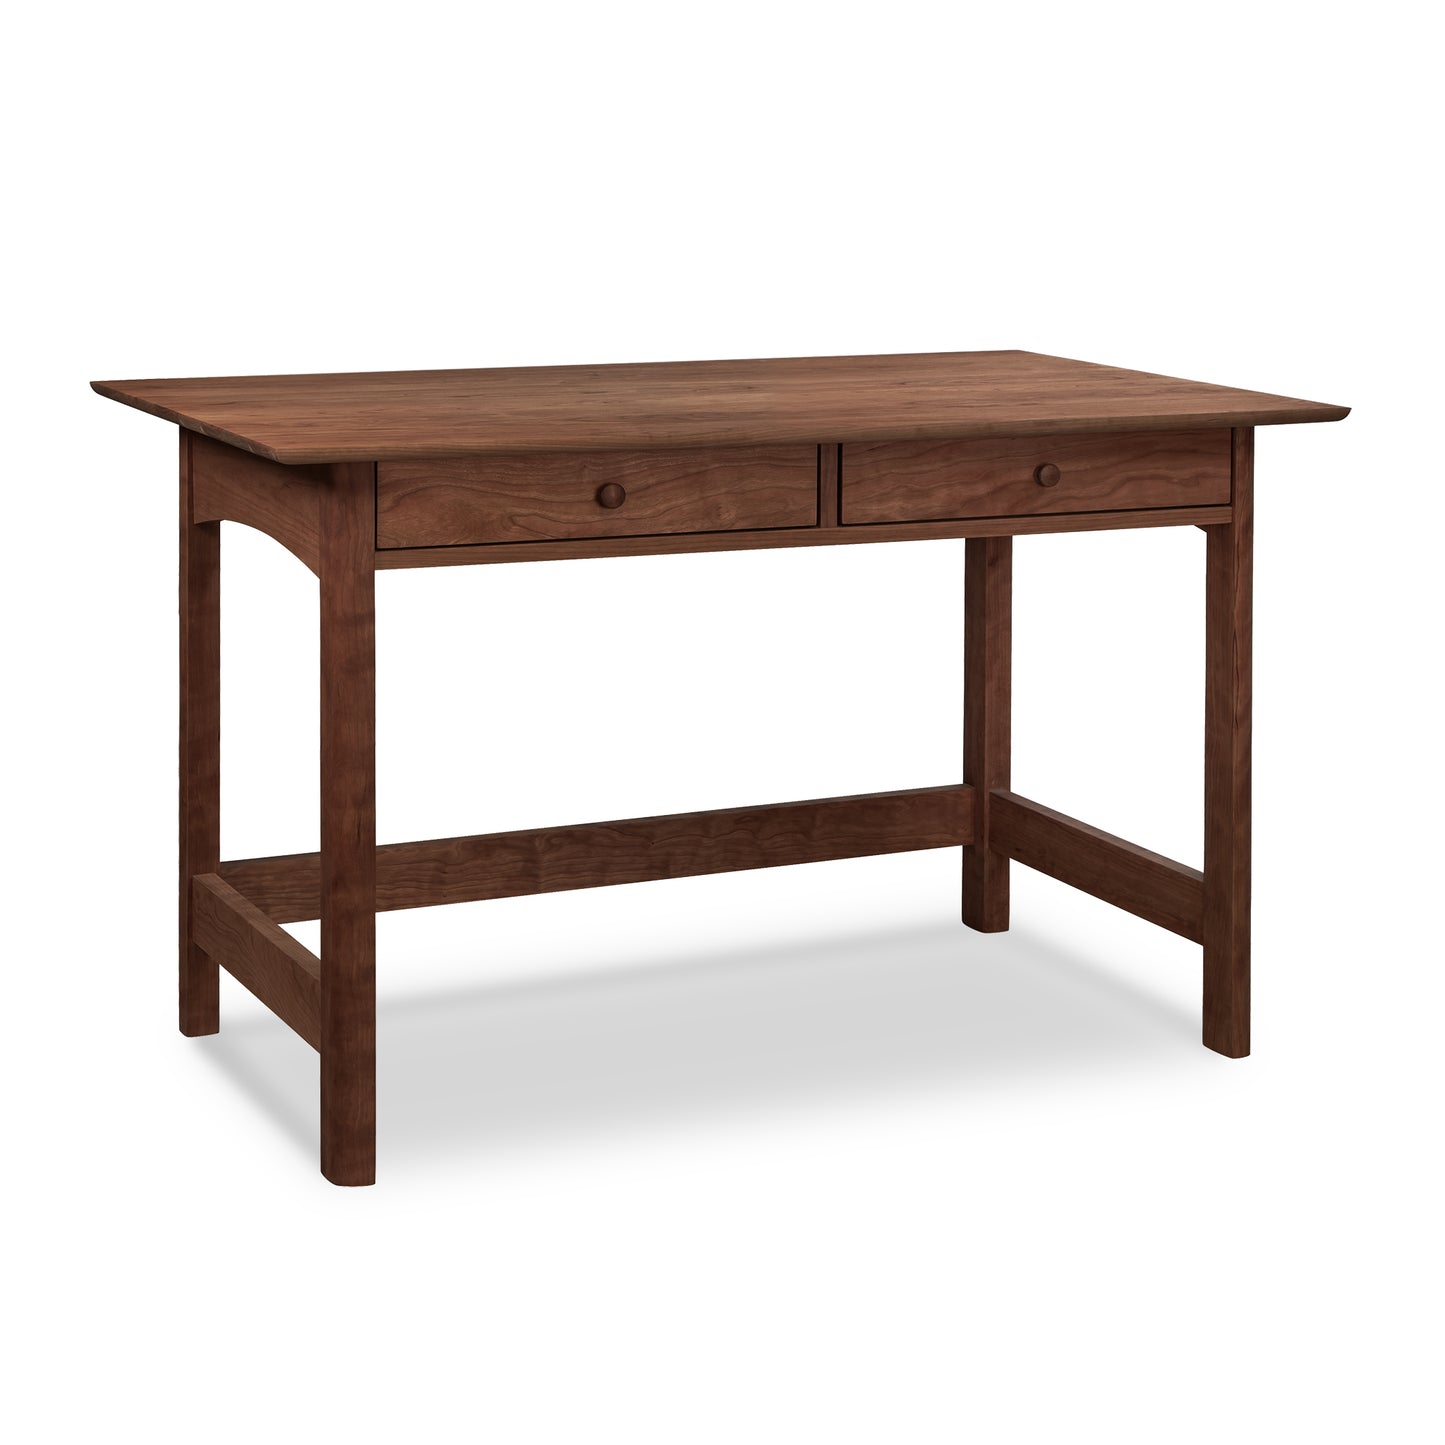 Handcrafted in Vermont, this Heartwood Shaker Writing Desk by Vermont Furniture Designs, made from sustainably sourced cherry, maple, and walnut wood with two drawers, sits on a white background.